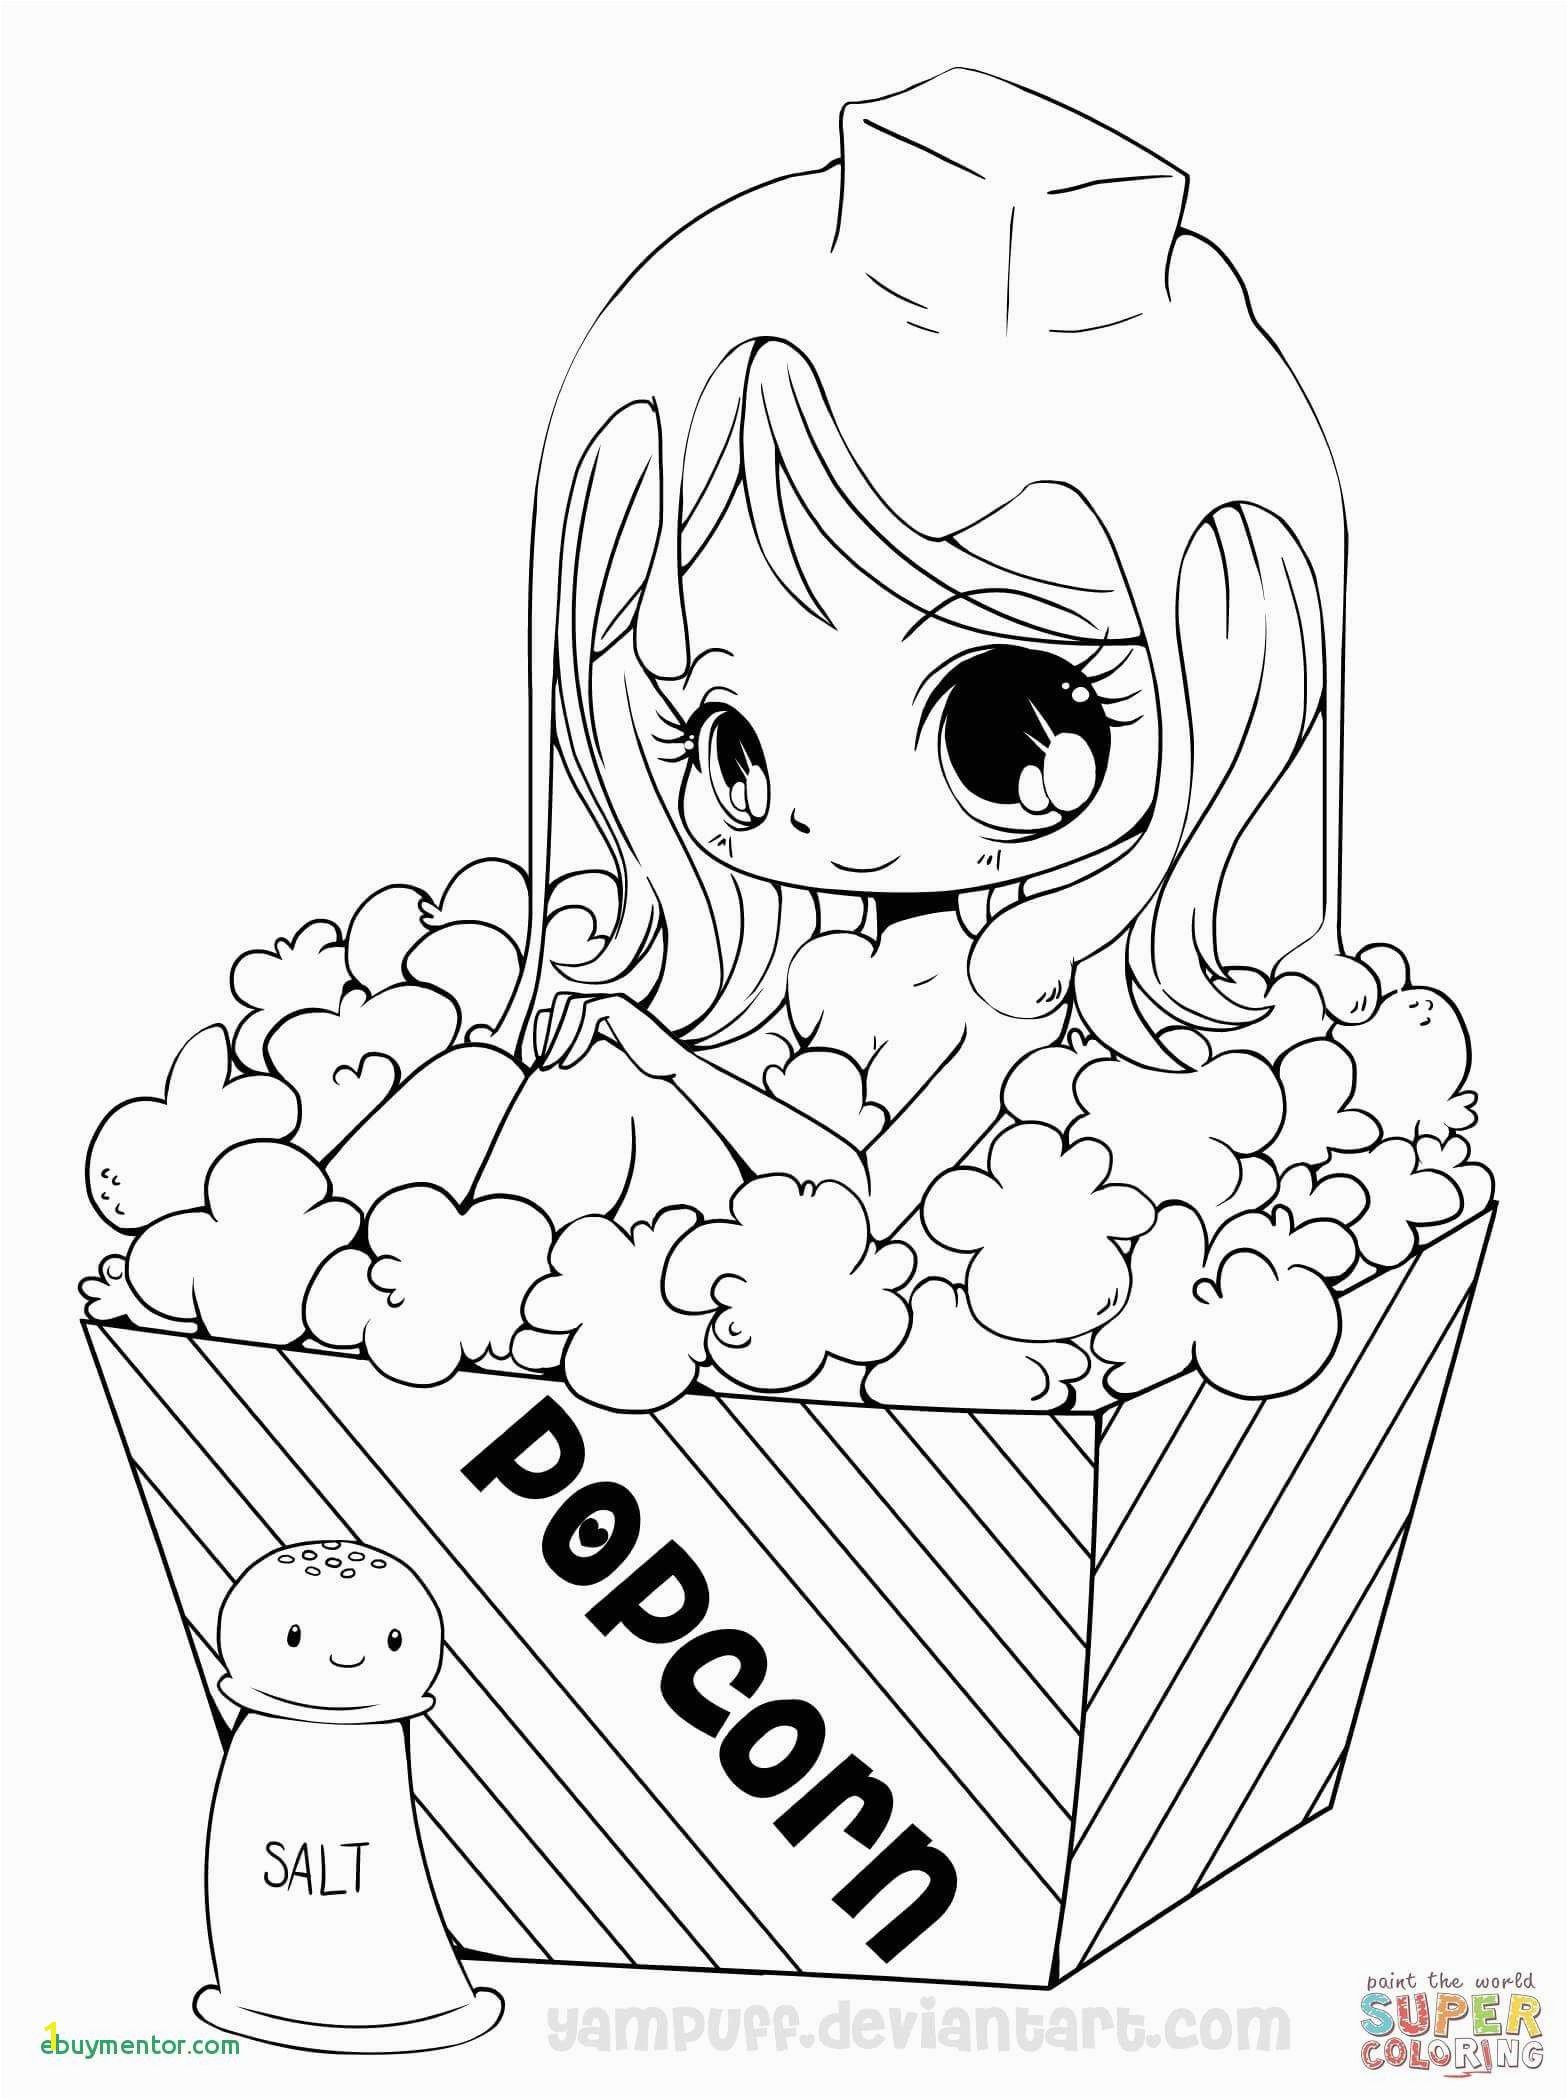 Cute Girl Coloring Pages Awesome Cute Anime Girl Coloring Pages Jvzooreview